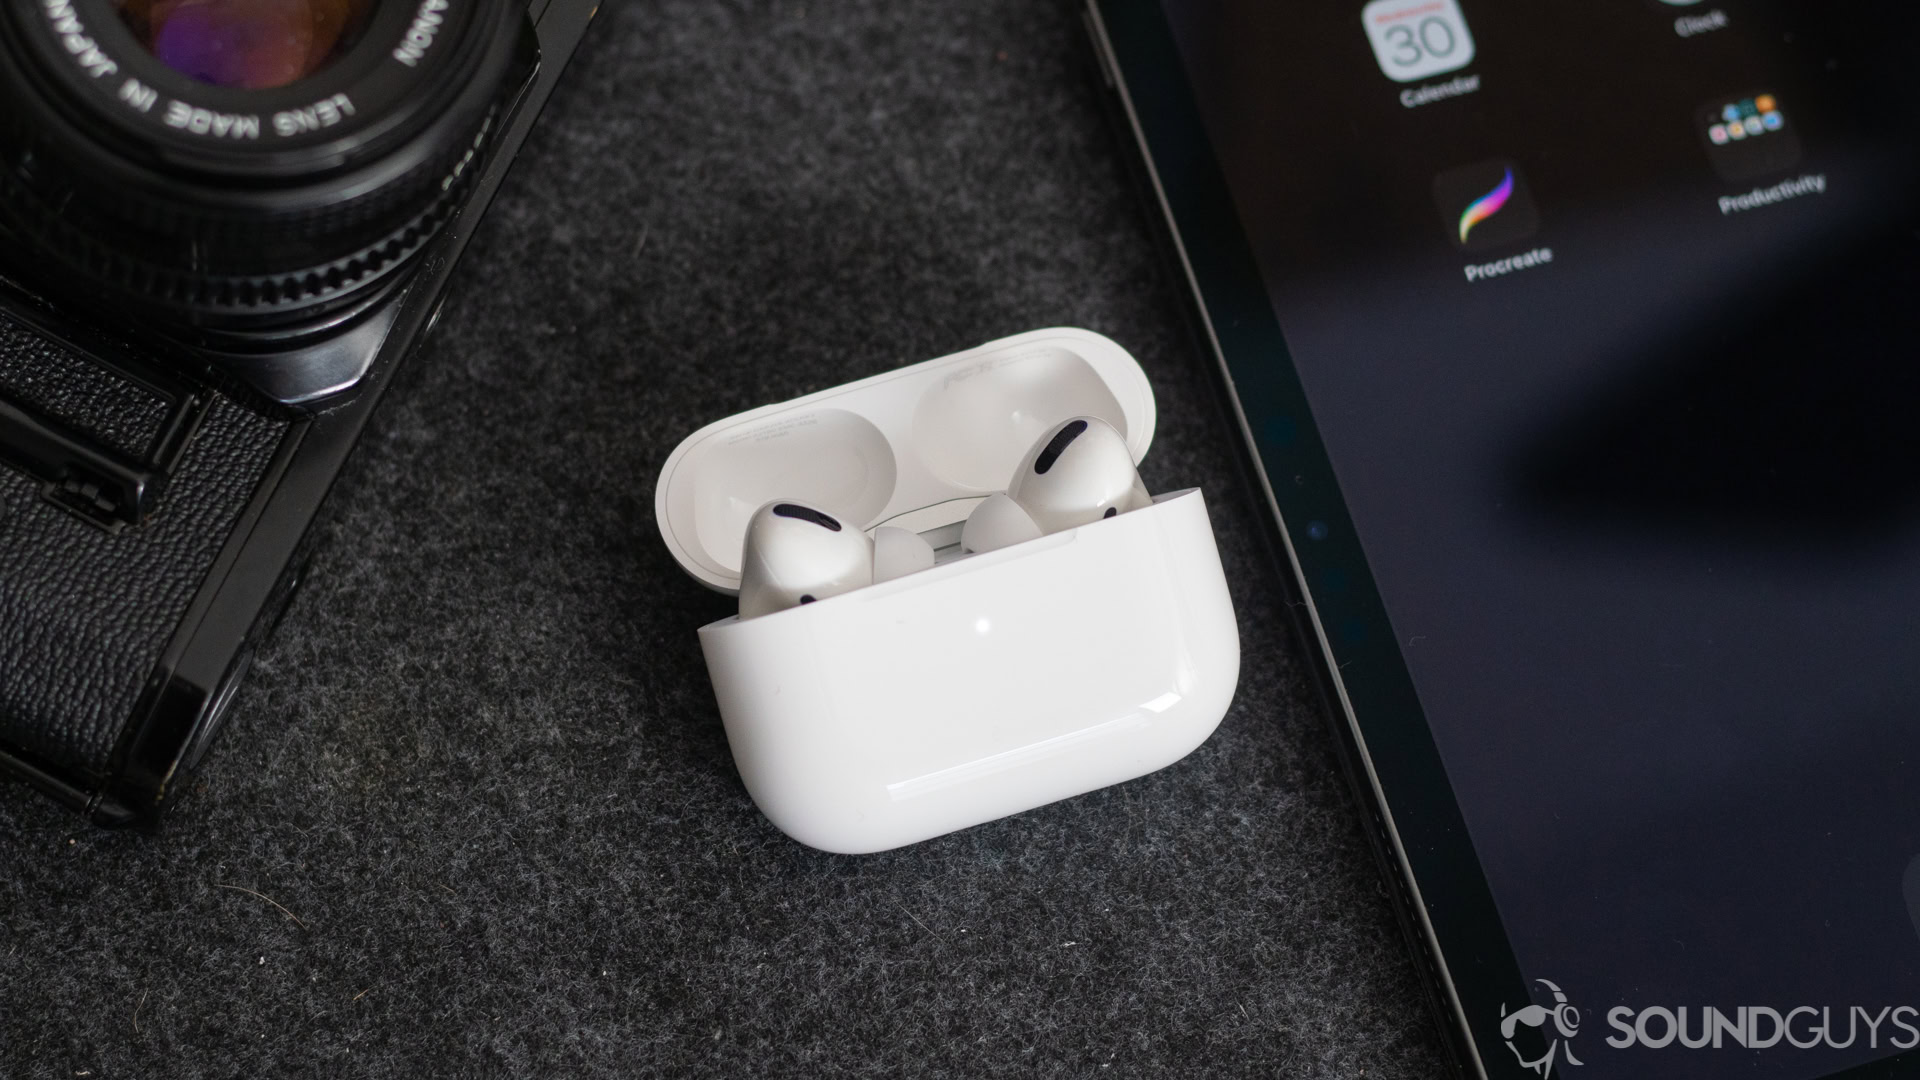 AirPods Pro headphones in the wireless charging case next to an iPhone and a digital camera.